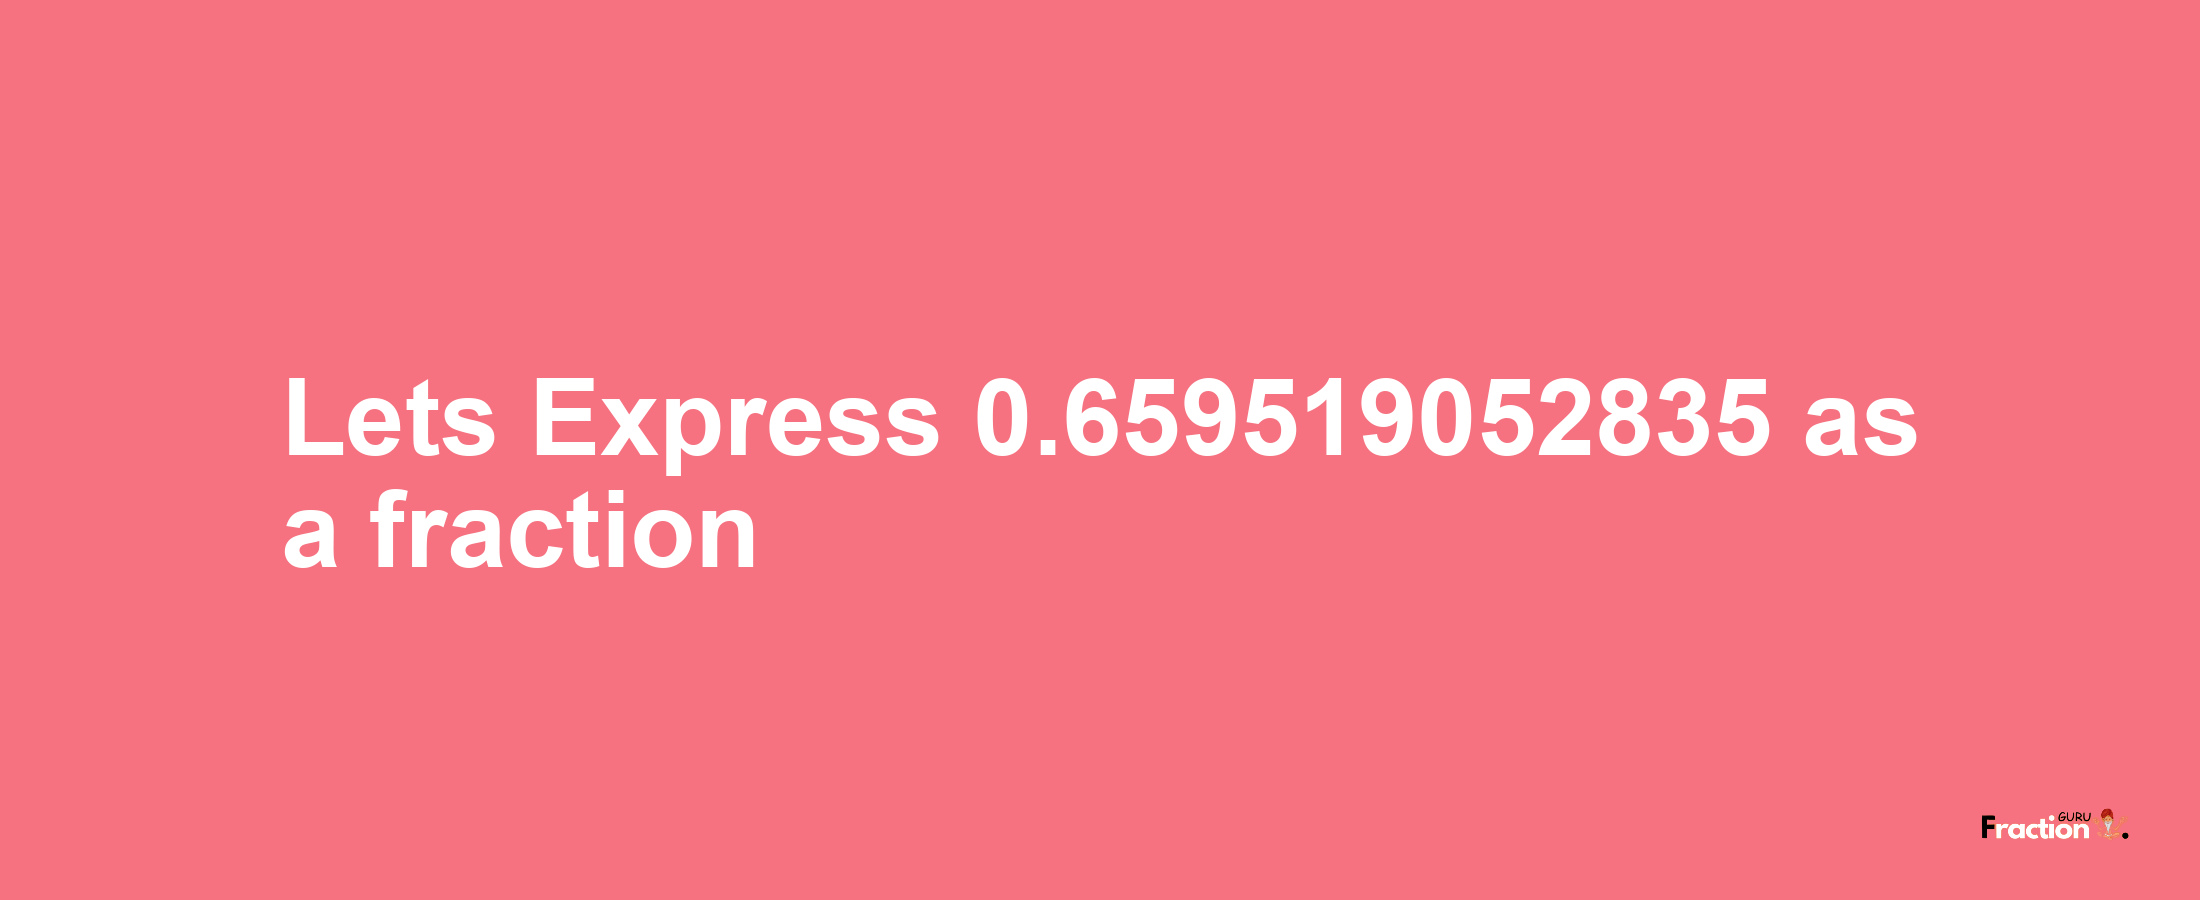 Lets Express 0.659519052835 as afraction